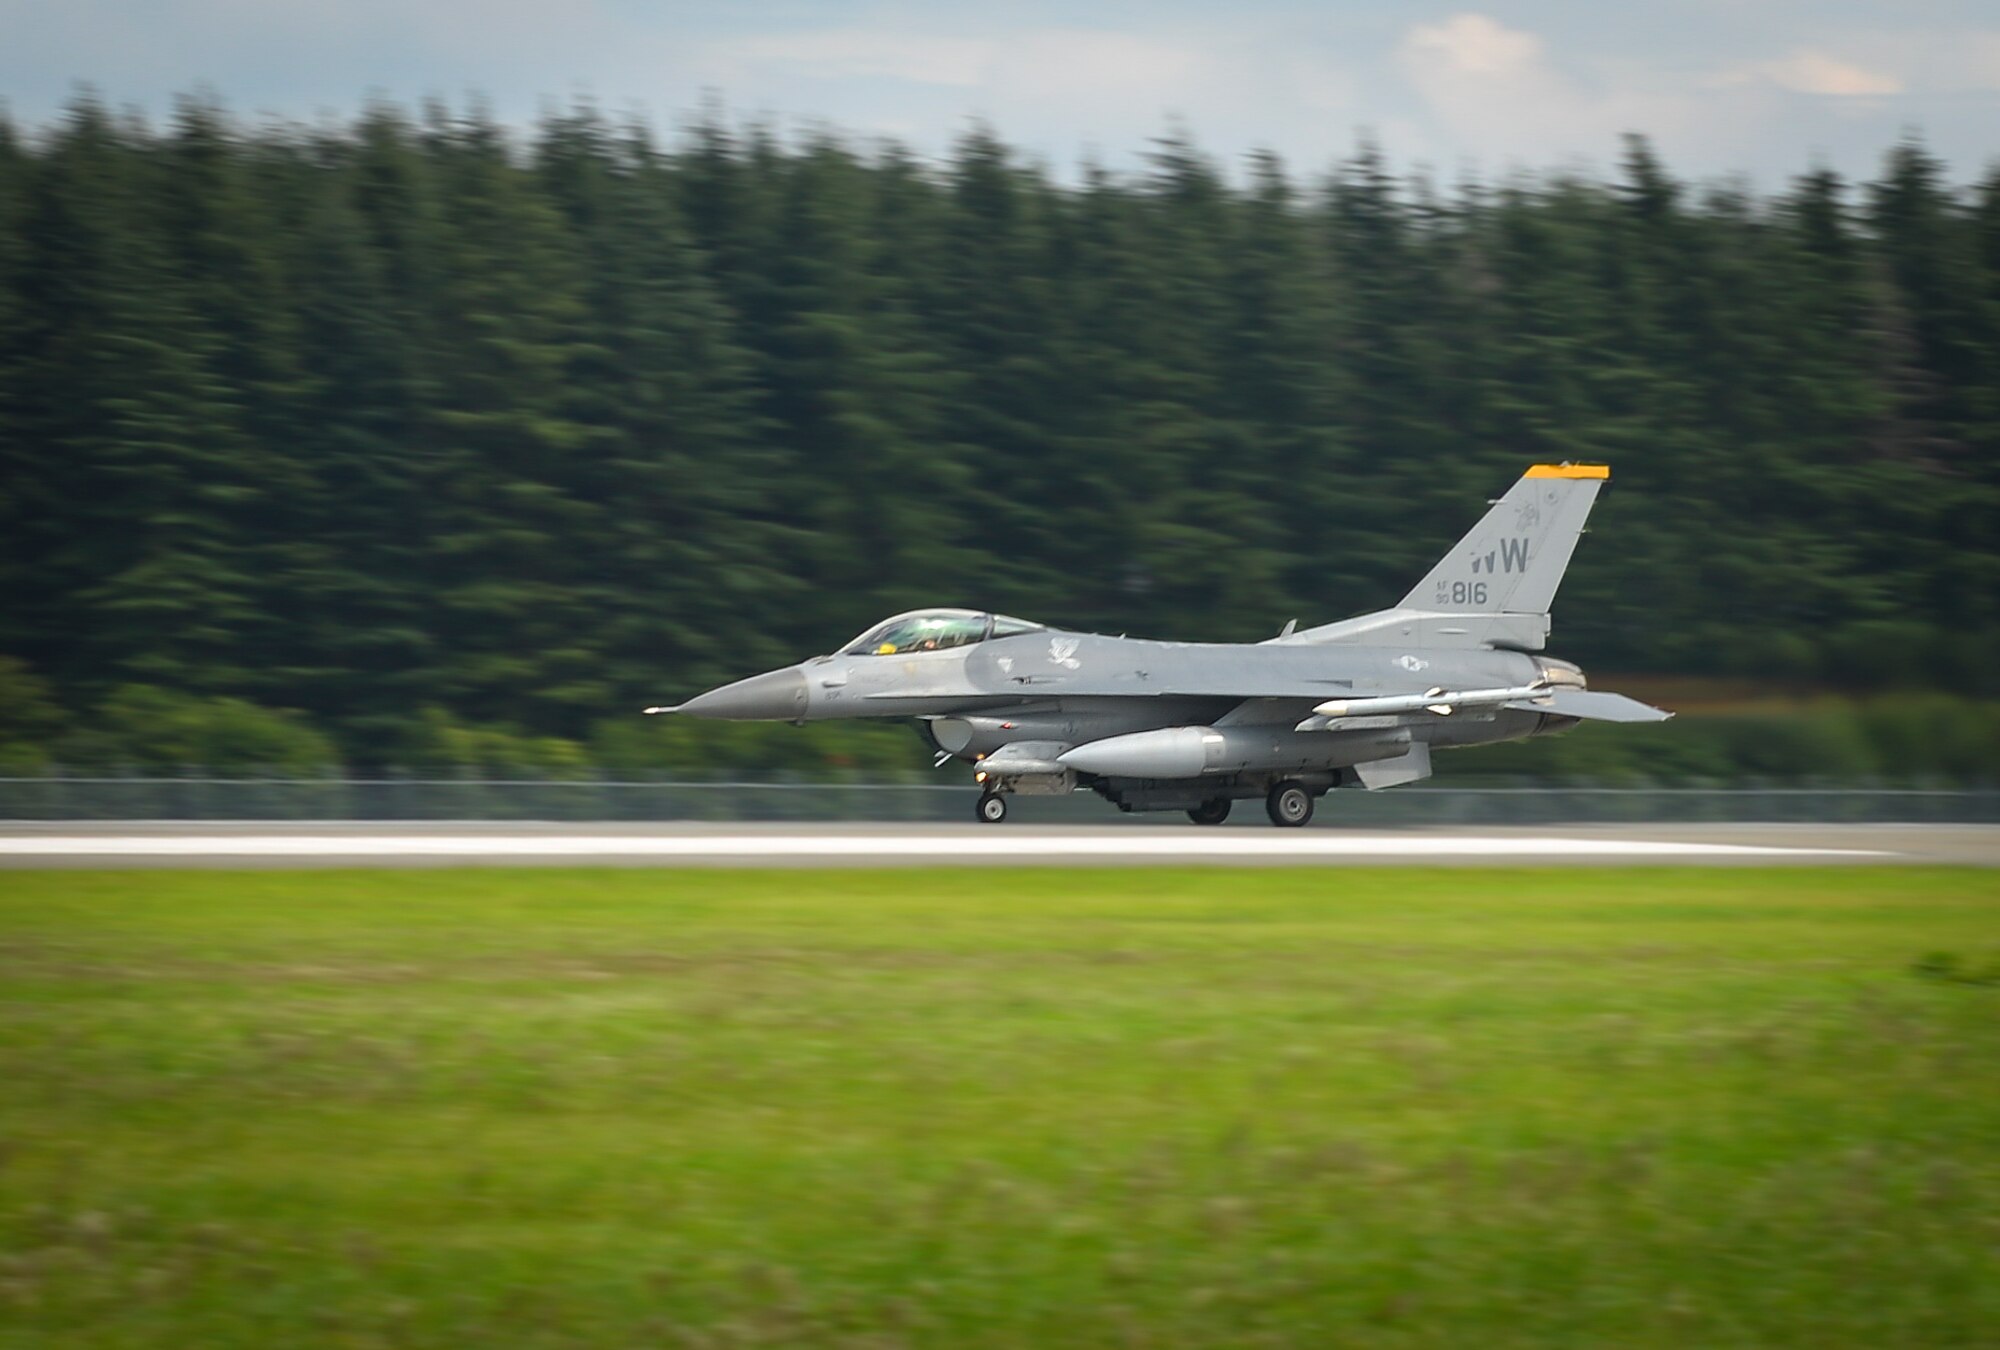 An F-16 Fighting Falcon assigned to the 35th Fighter Wing, Misawa Air Base, takes off at Yokota Air Base, Japan, Sep. 7, 2016. Due to the base’s strategic location, as well as refueling and maintenance capabilities, Yokota regularly supports aircraft and missions from other U.S. bases. (U.S. Air Force Photo by Airman 1st Class Baker/Released)